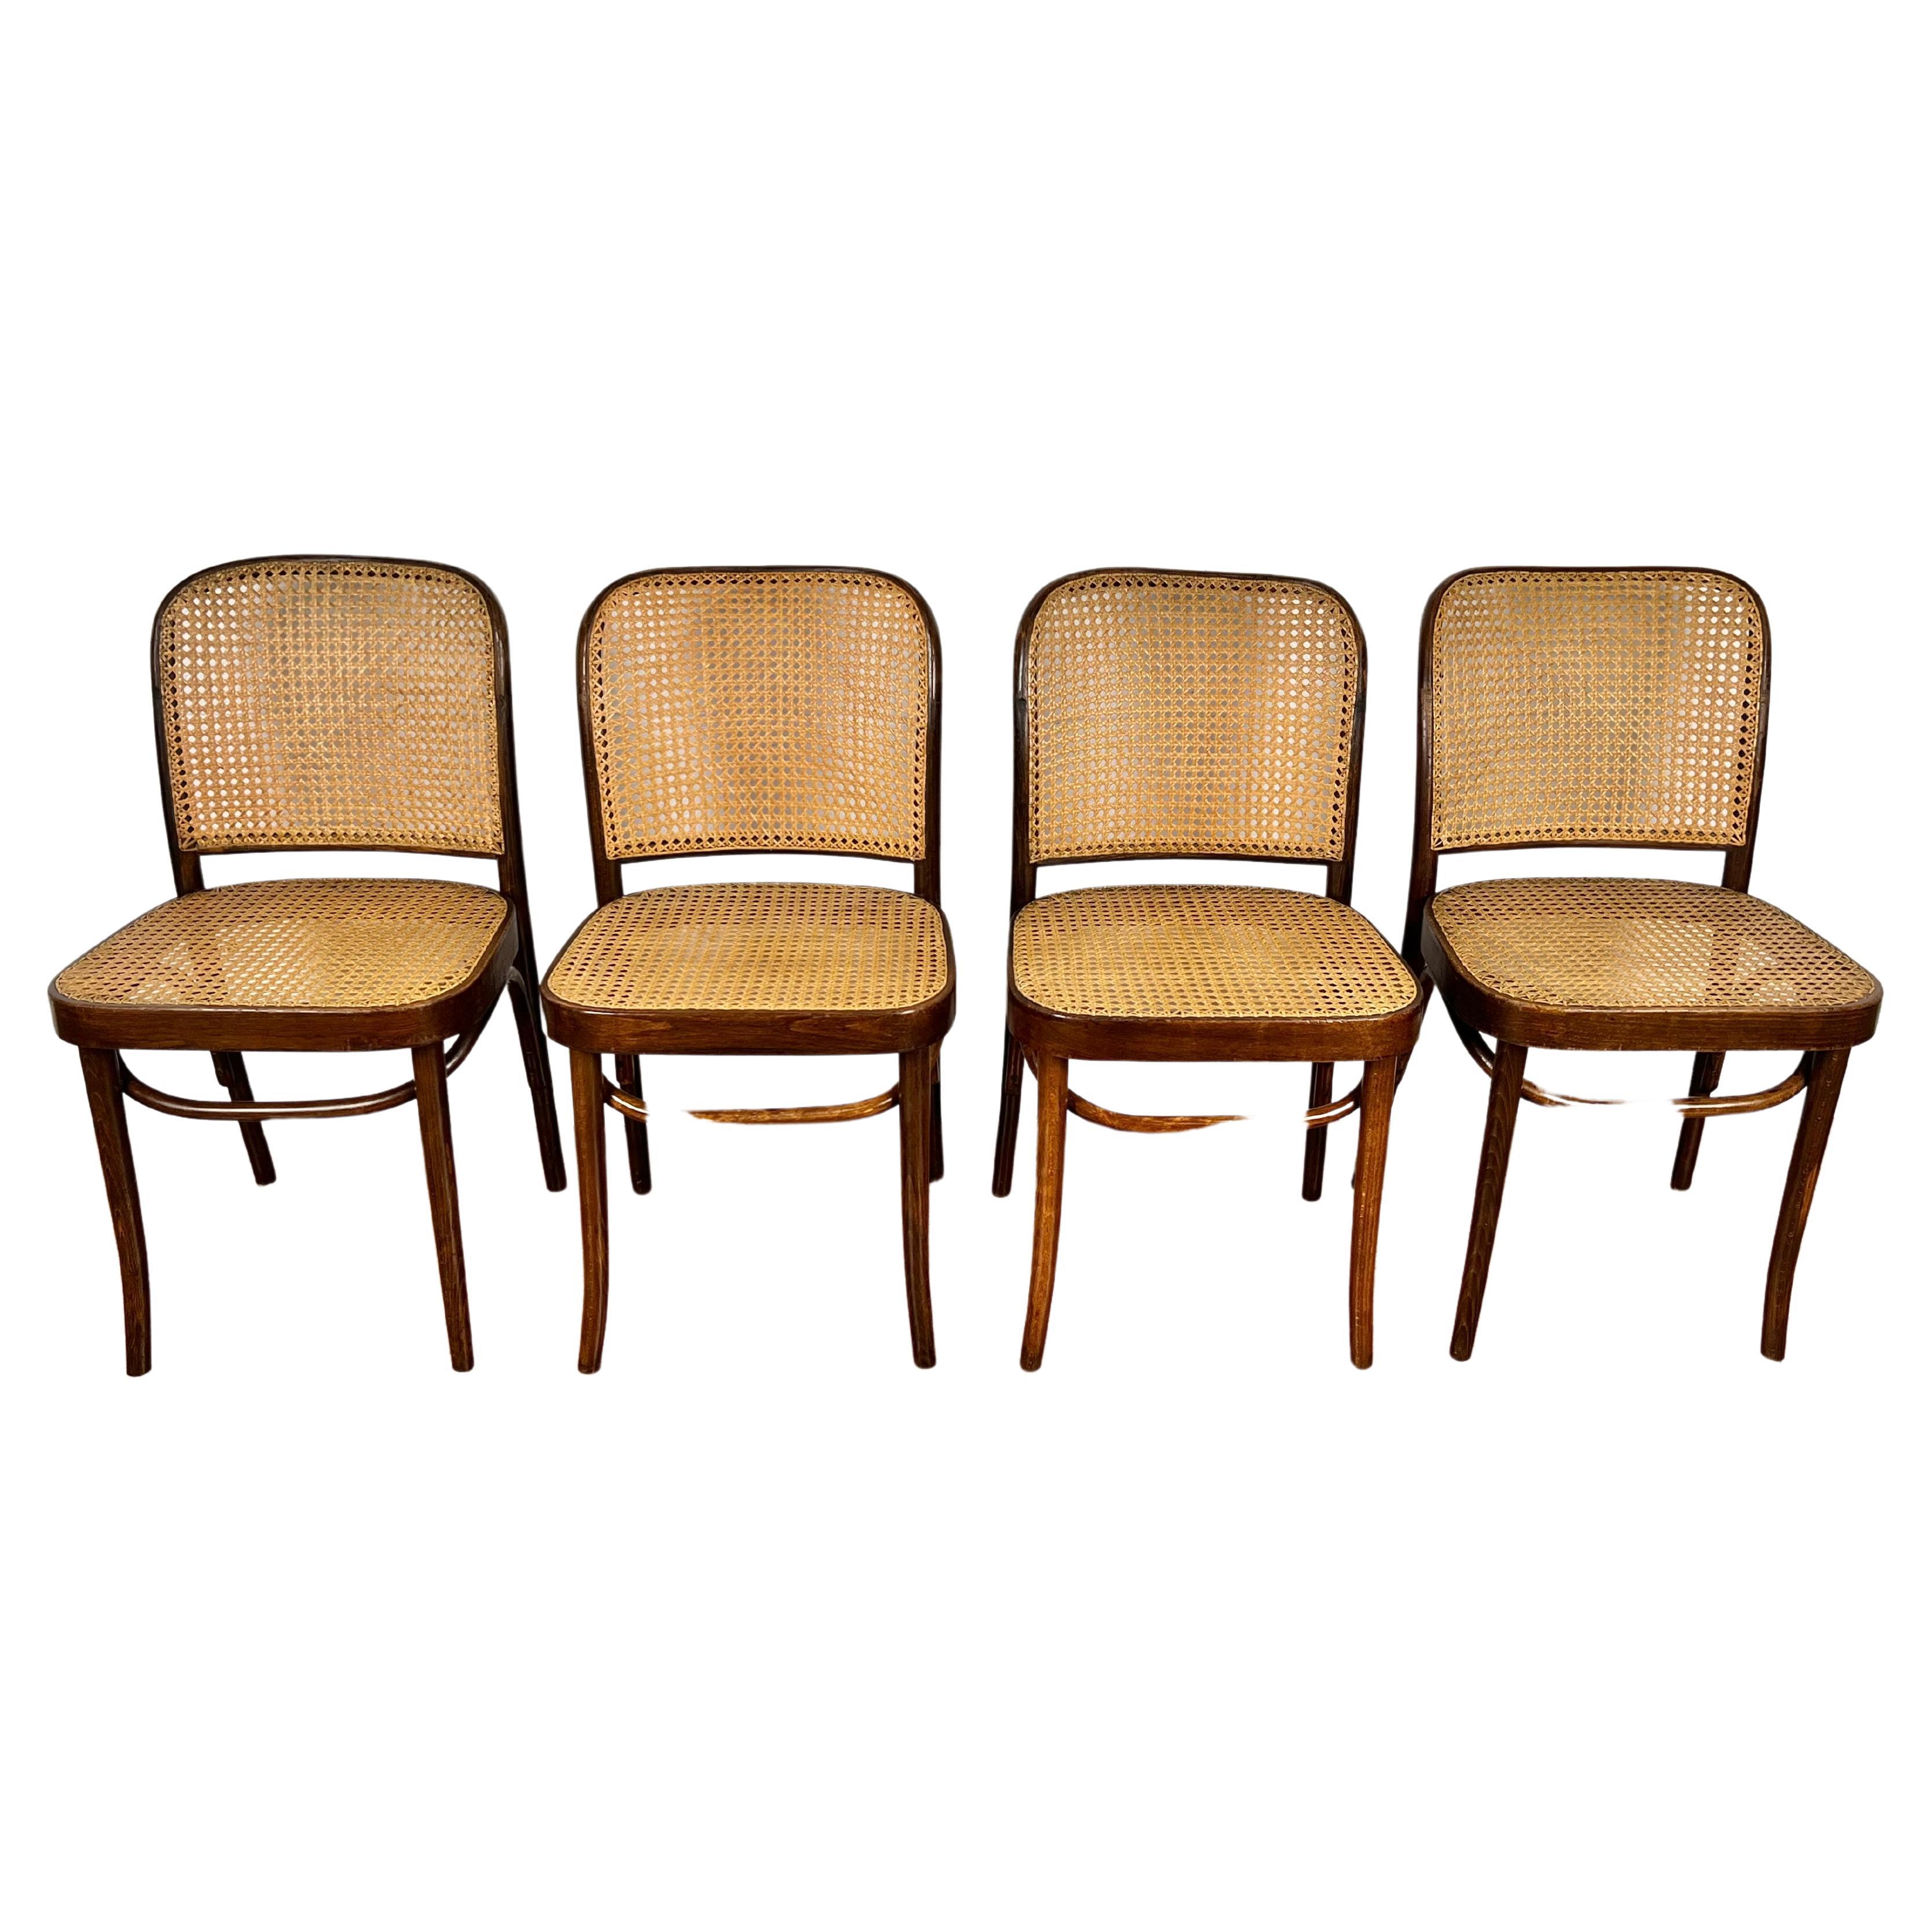 This lovely early set of Prague chairs designed by Josef Hoffmann were produced in Poland by FMG. Each chair retains an original hand caned seat and back and the manufacturer's paper labels and stamps as well. The finish has age appropriate wear and